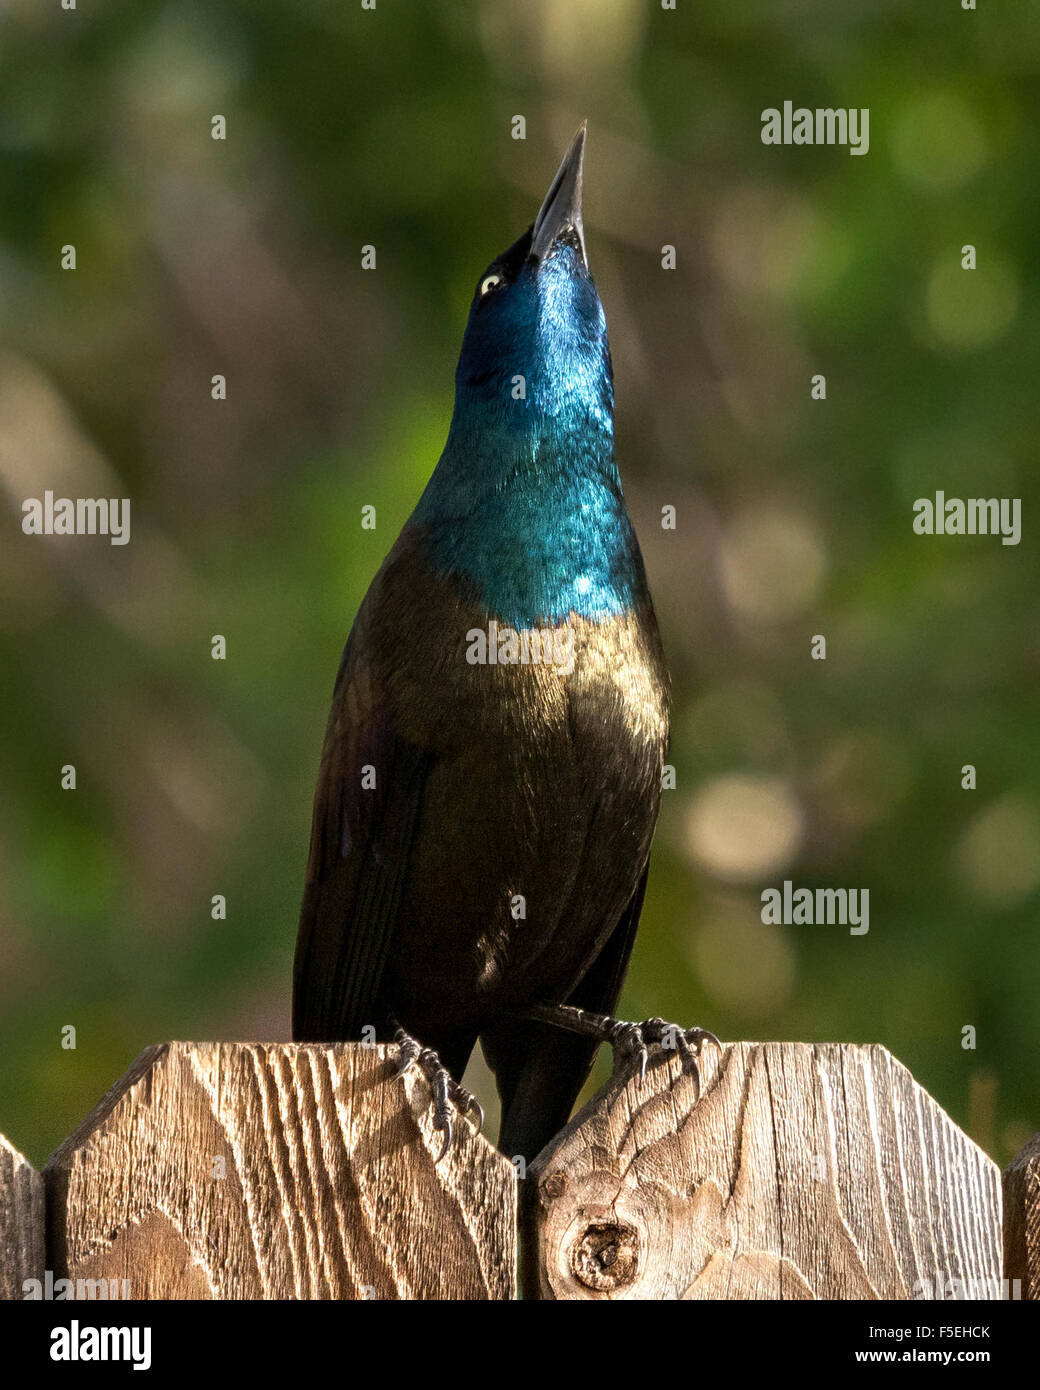 Common Grackle bird perched on a fence looking up, Colorado, USA Stock Photo